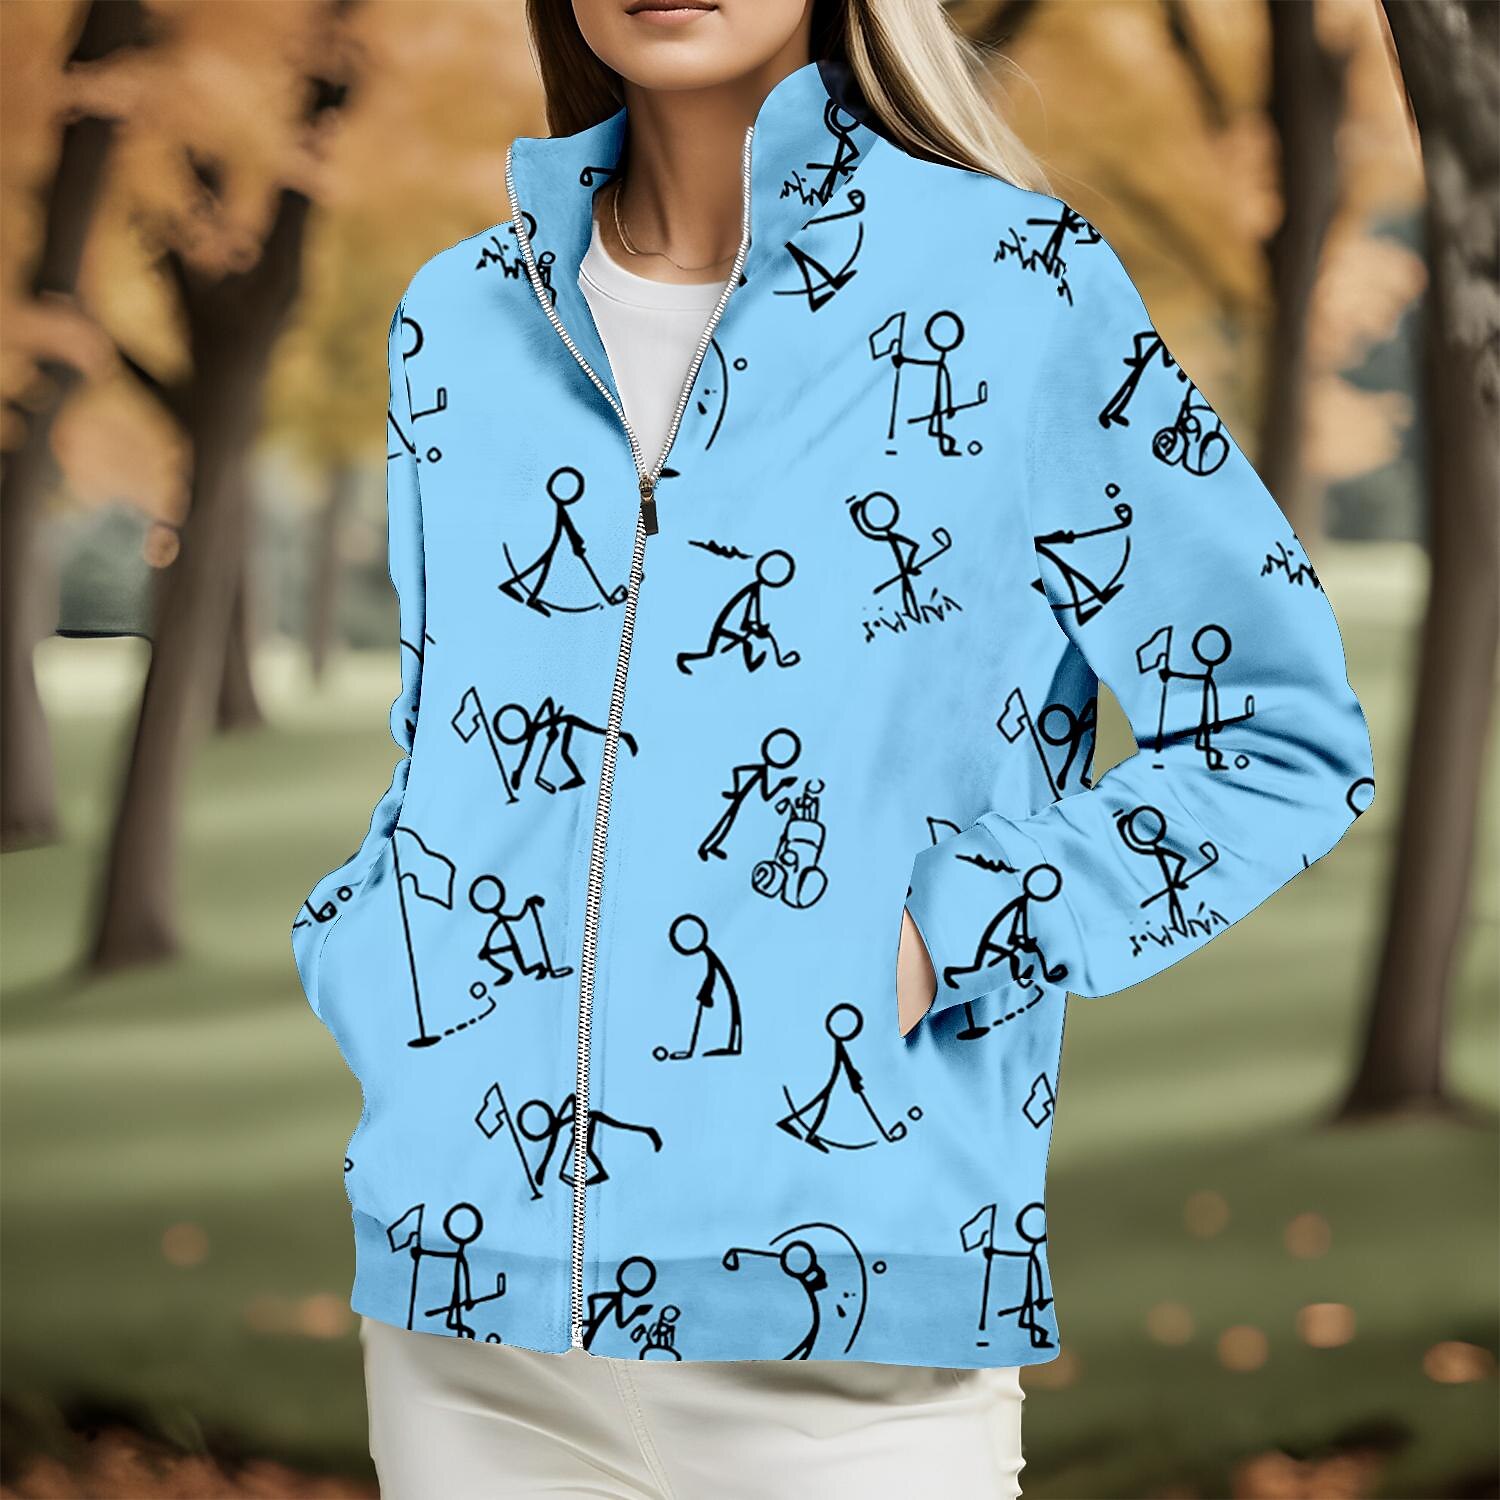 Women's Golf Hoodie Golf Pullover Golf Sweatshirt Thermal Warm Breathable Moisture Wicking Long Sleeve Golf Outerwear Top Regular Fit Side Pockets Full Zip Funny Printed Spring Autumn Tennis Golf 2023 - € 27.99 –P3